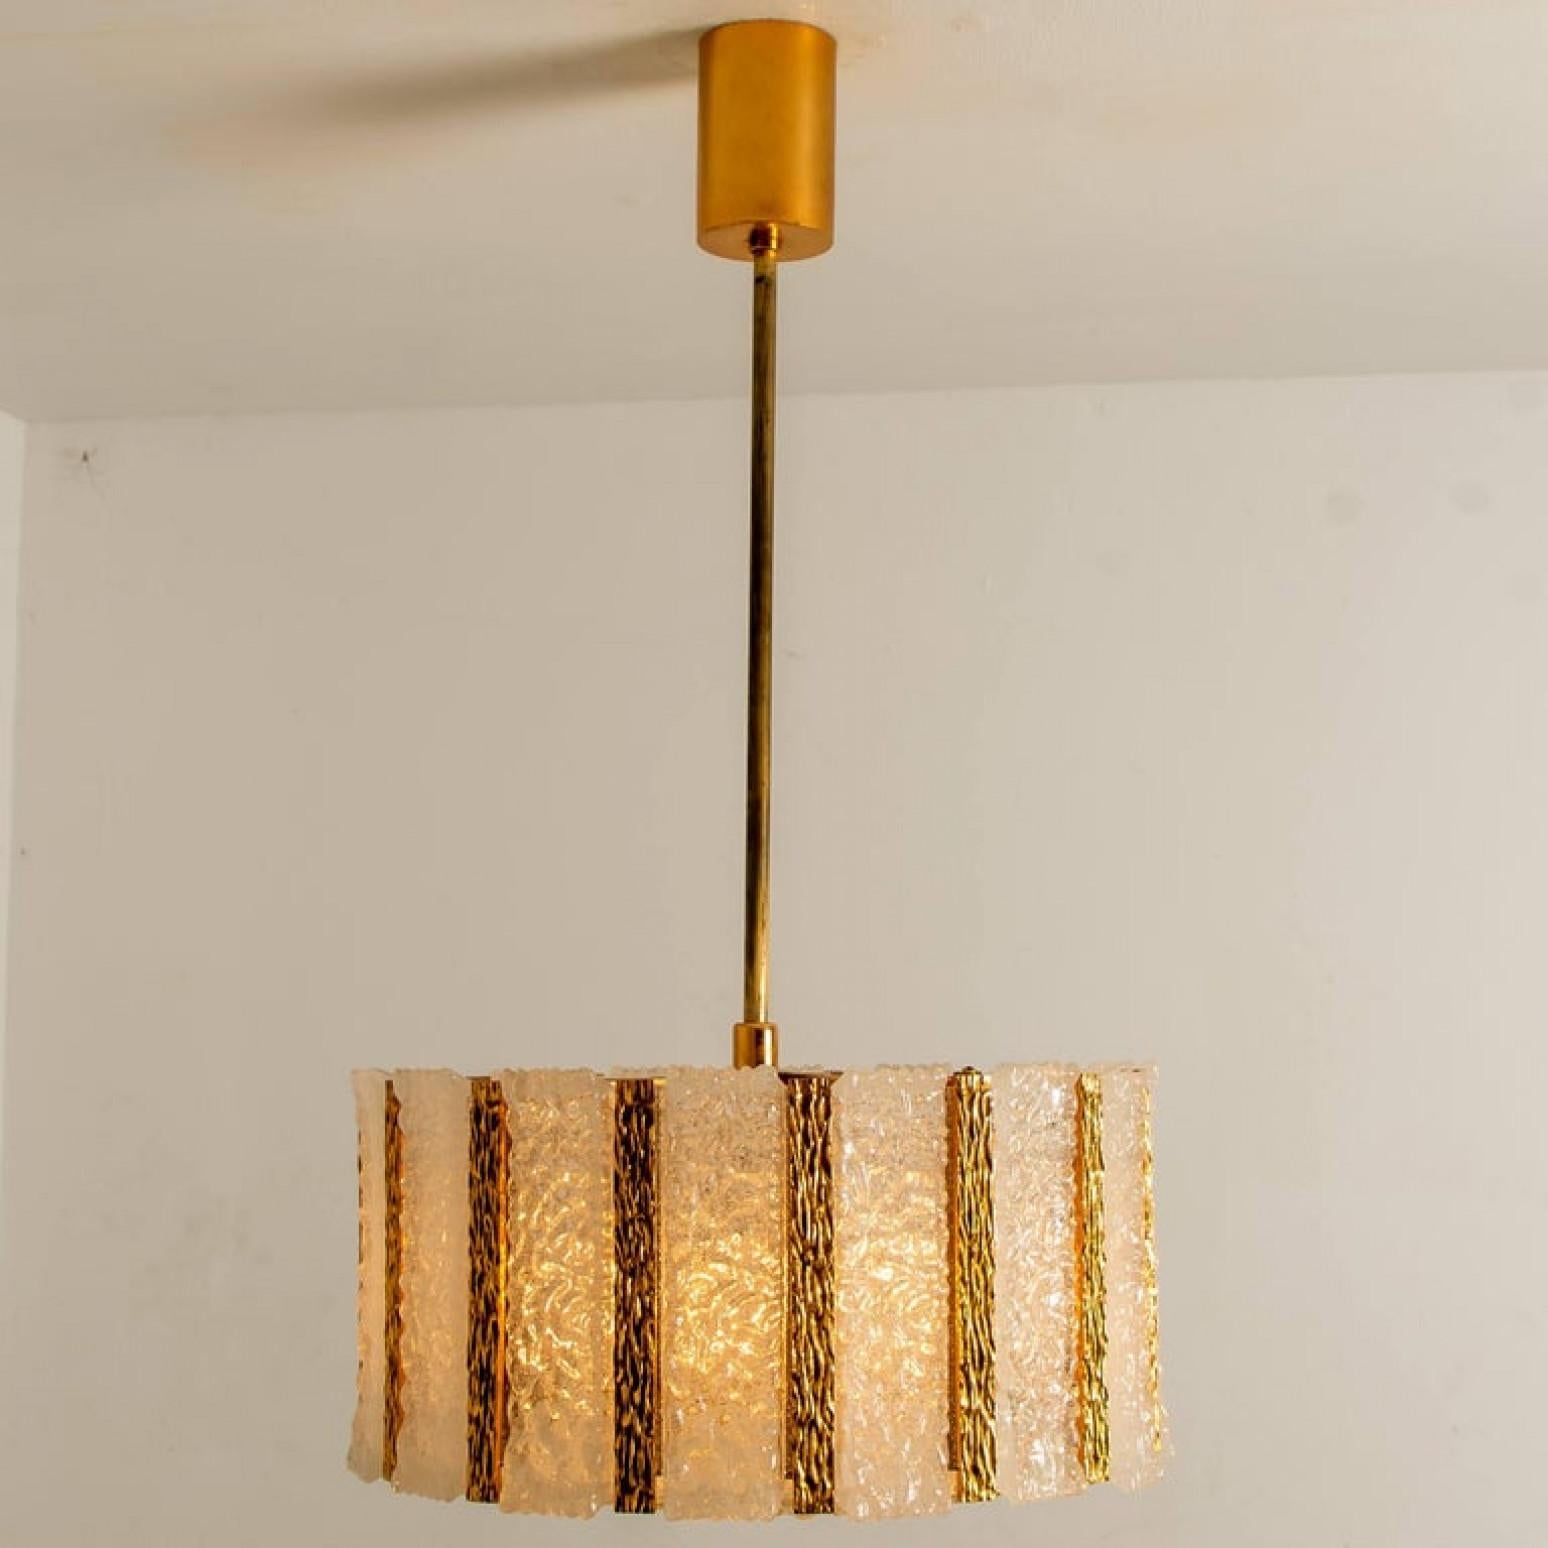 1 of the 10 J.T. Drum Wall Sconces Gold-Plated and Ice Glass, Austria For Sale 2